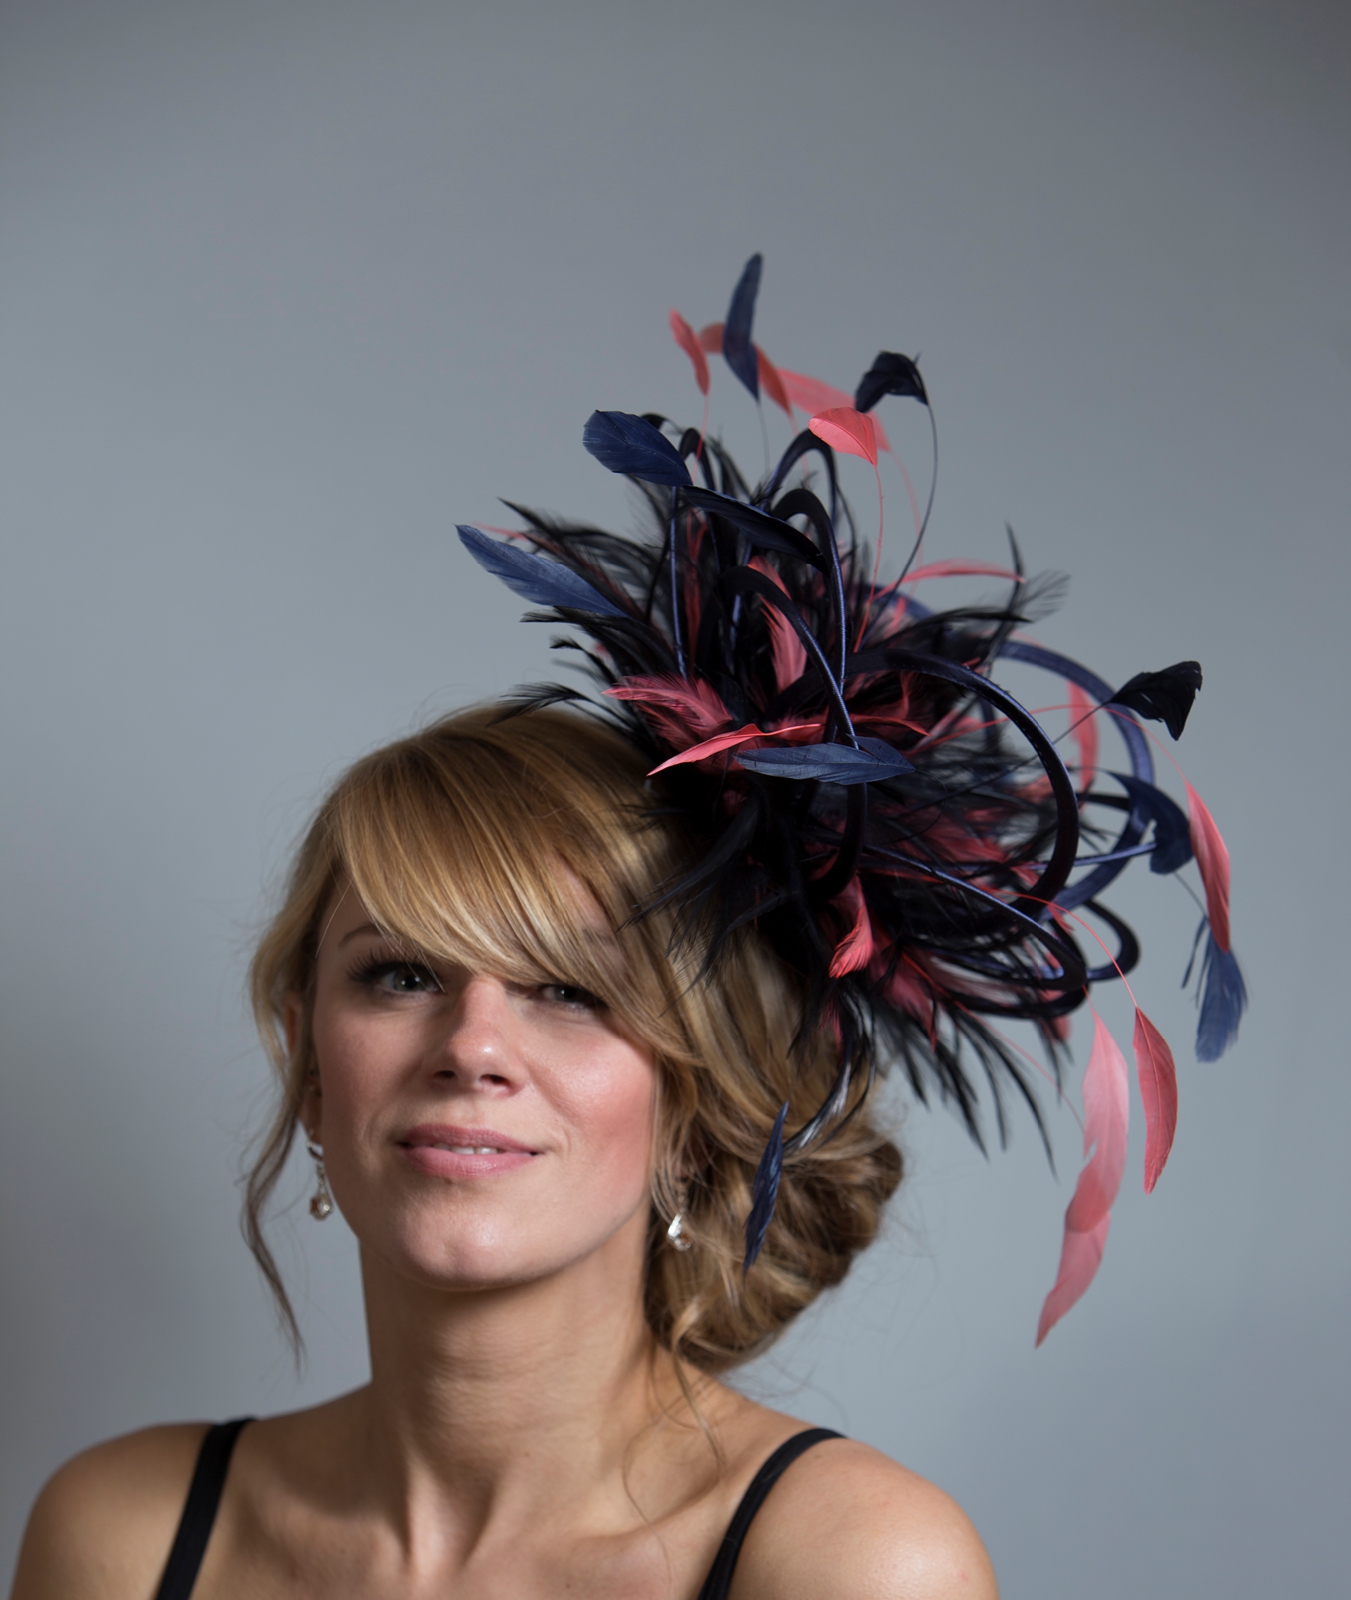 Taupe Nude & Coral Pink Fascinator hat choose any colour feathers/satin Medium 